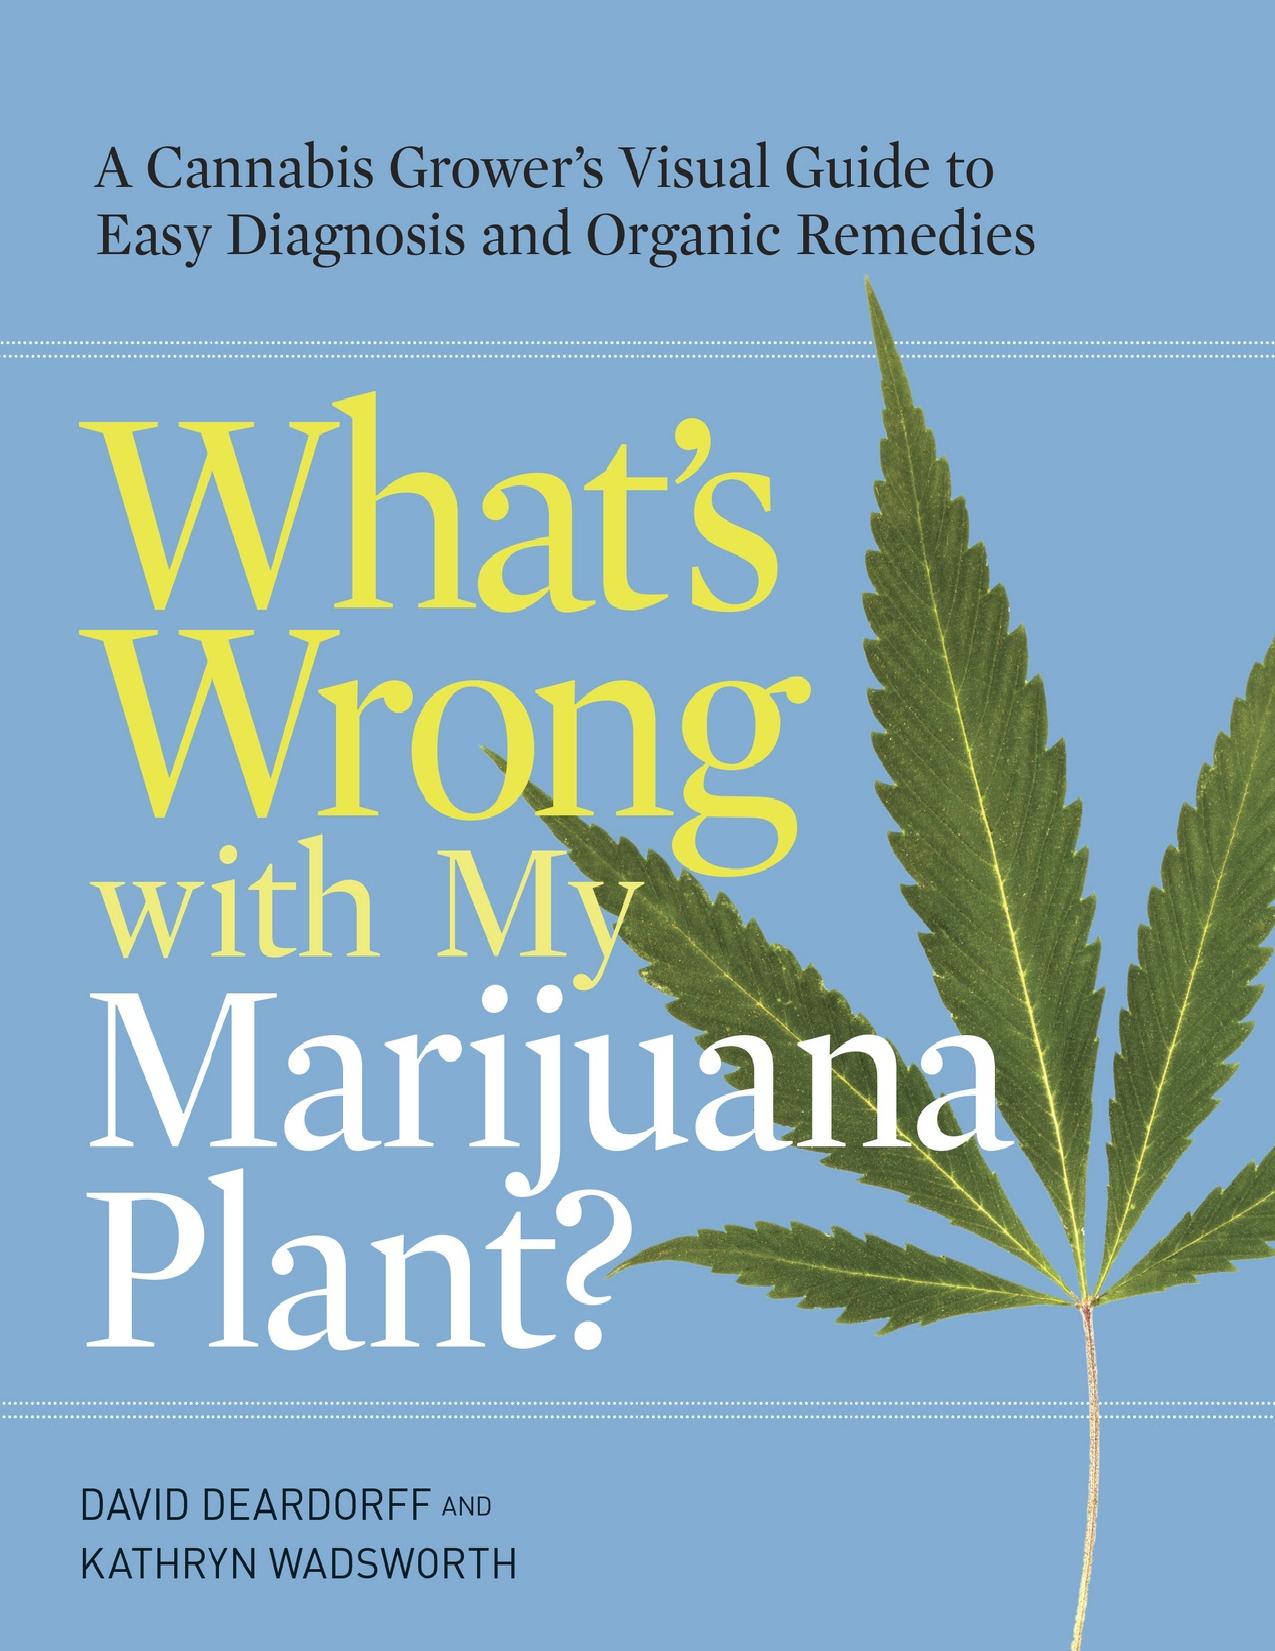 What’s Wrong with My Marijuana Plant\?: A Cannabis Grower’s Visual Guide to Easy Diagnosis and Organic Remedies - PDFDrive.com